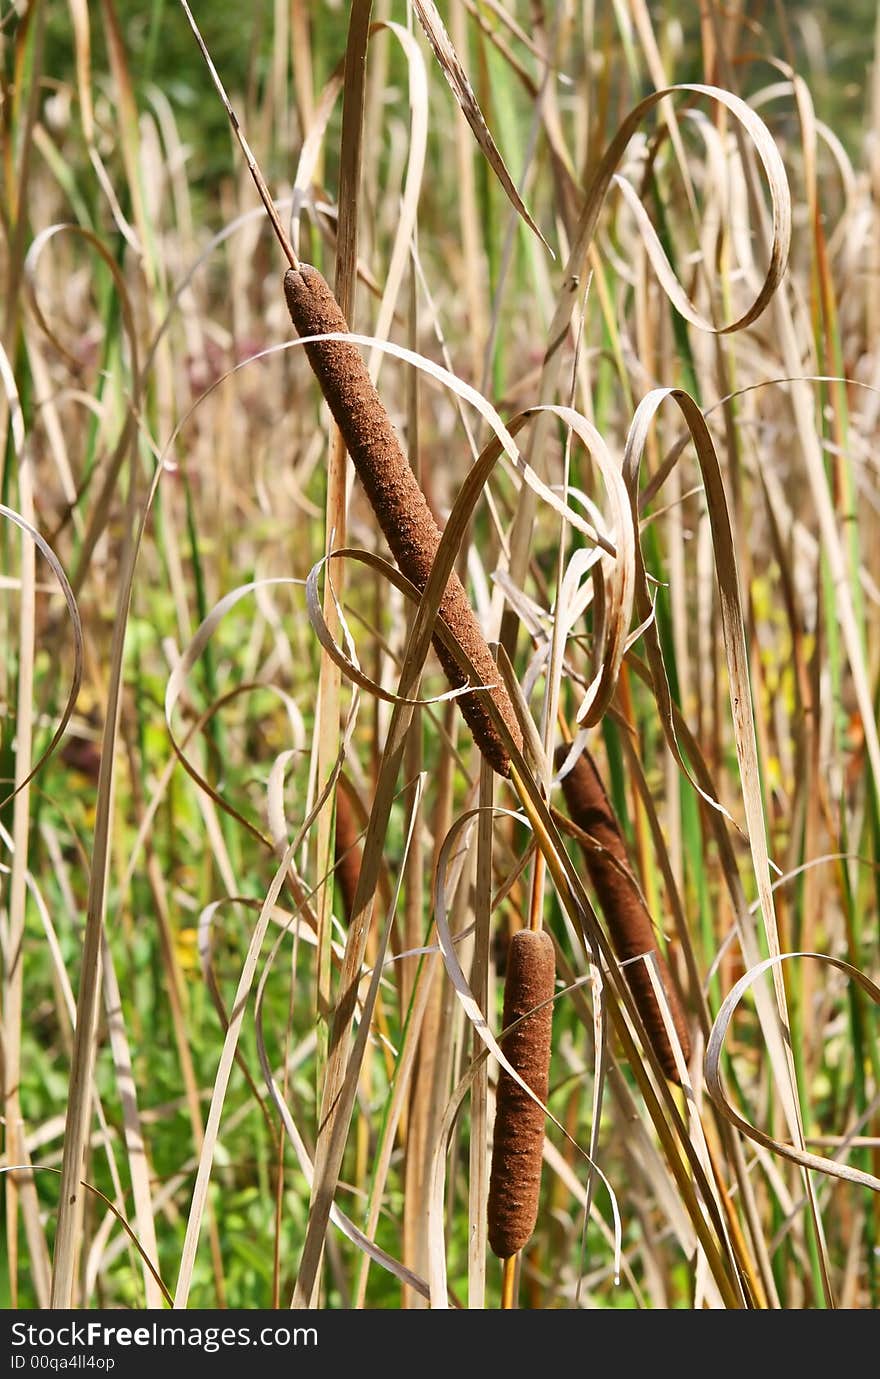 Cattail plants growing in Western New York. Cattail plants growing in Western New York